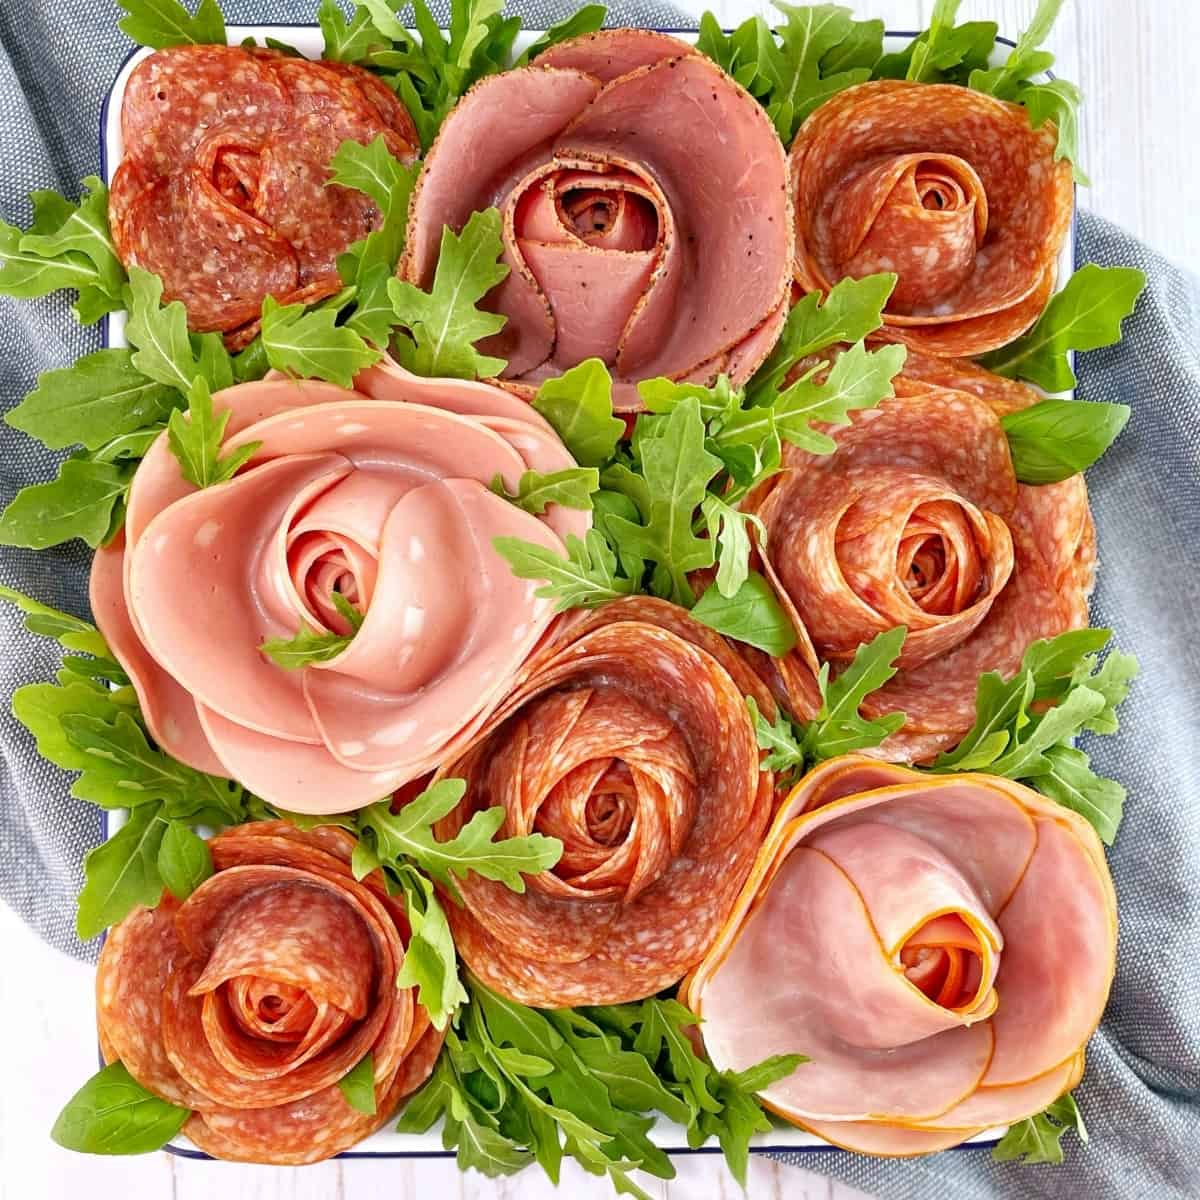 Several examples of meat roses made of pepperoni and other deli meats on a white tray with arugula.